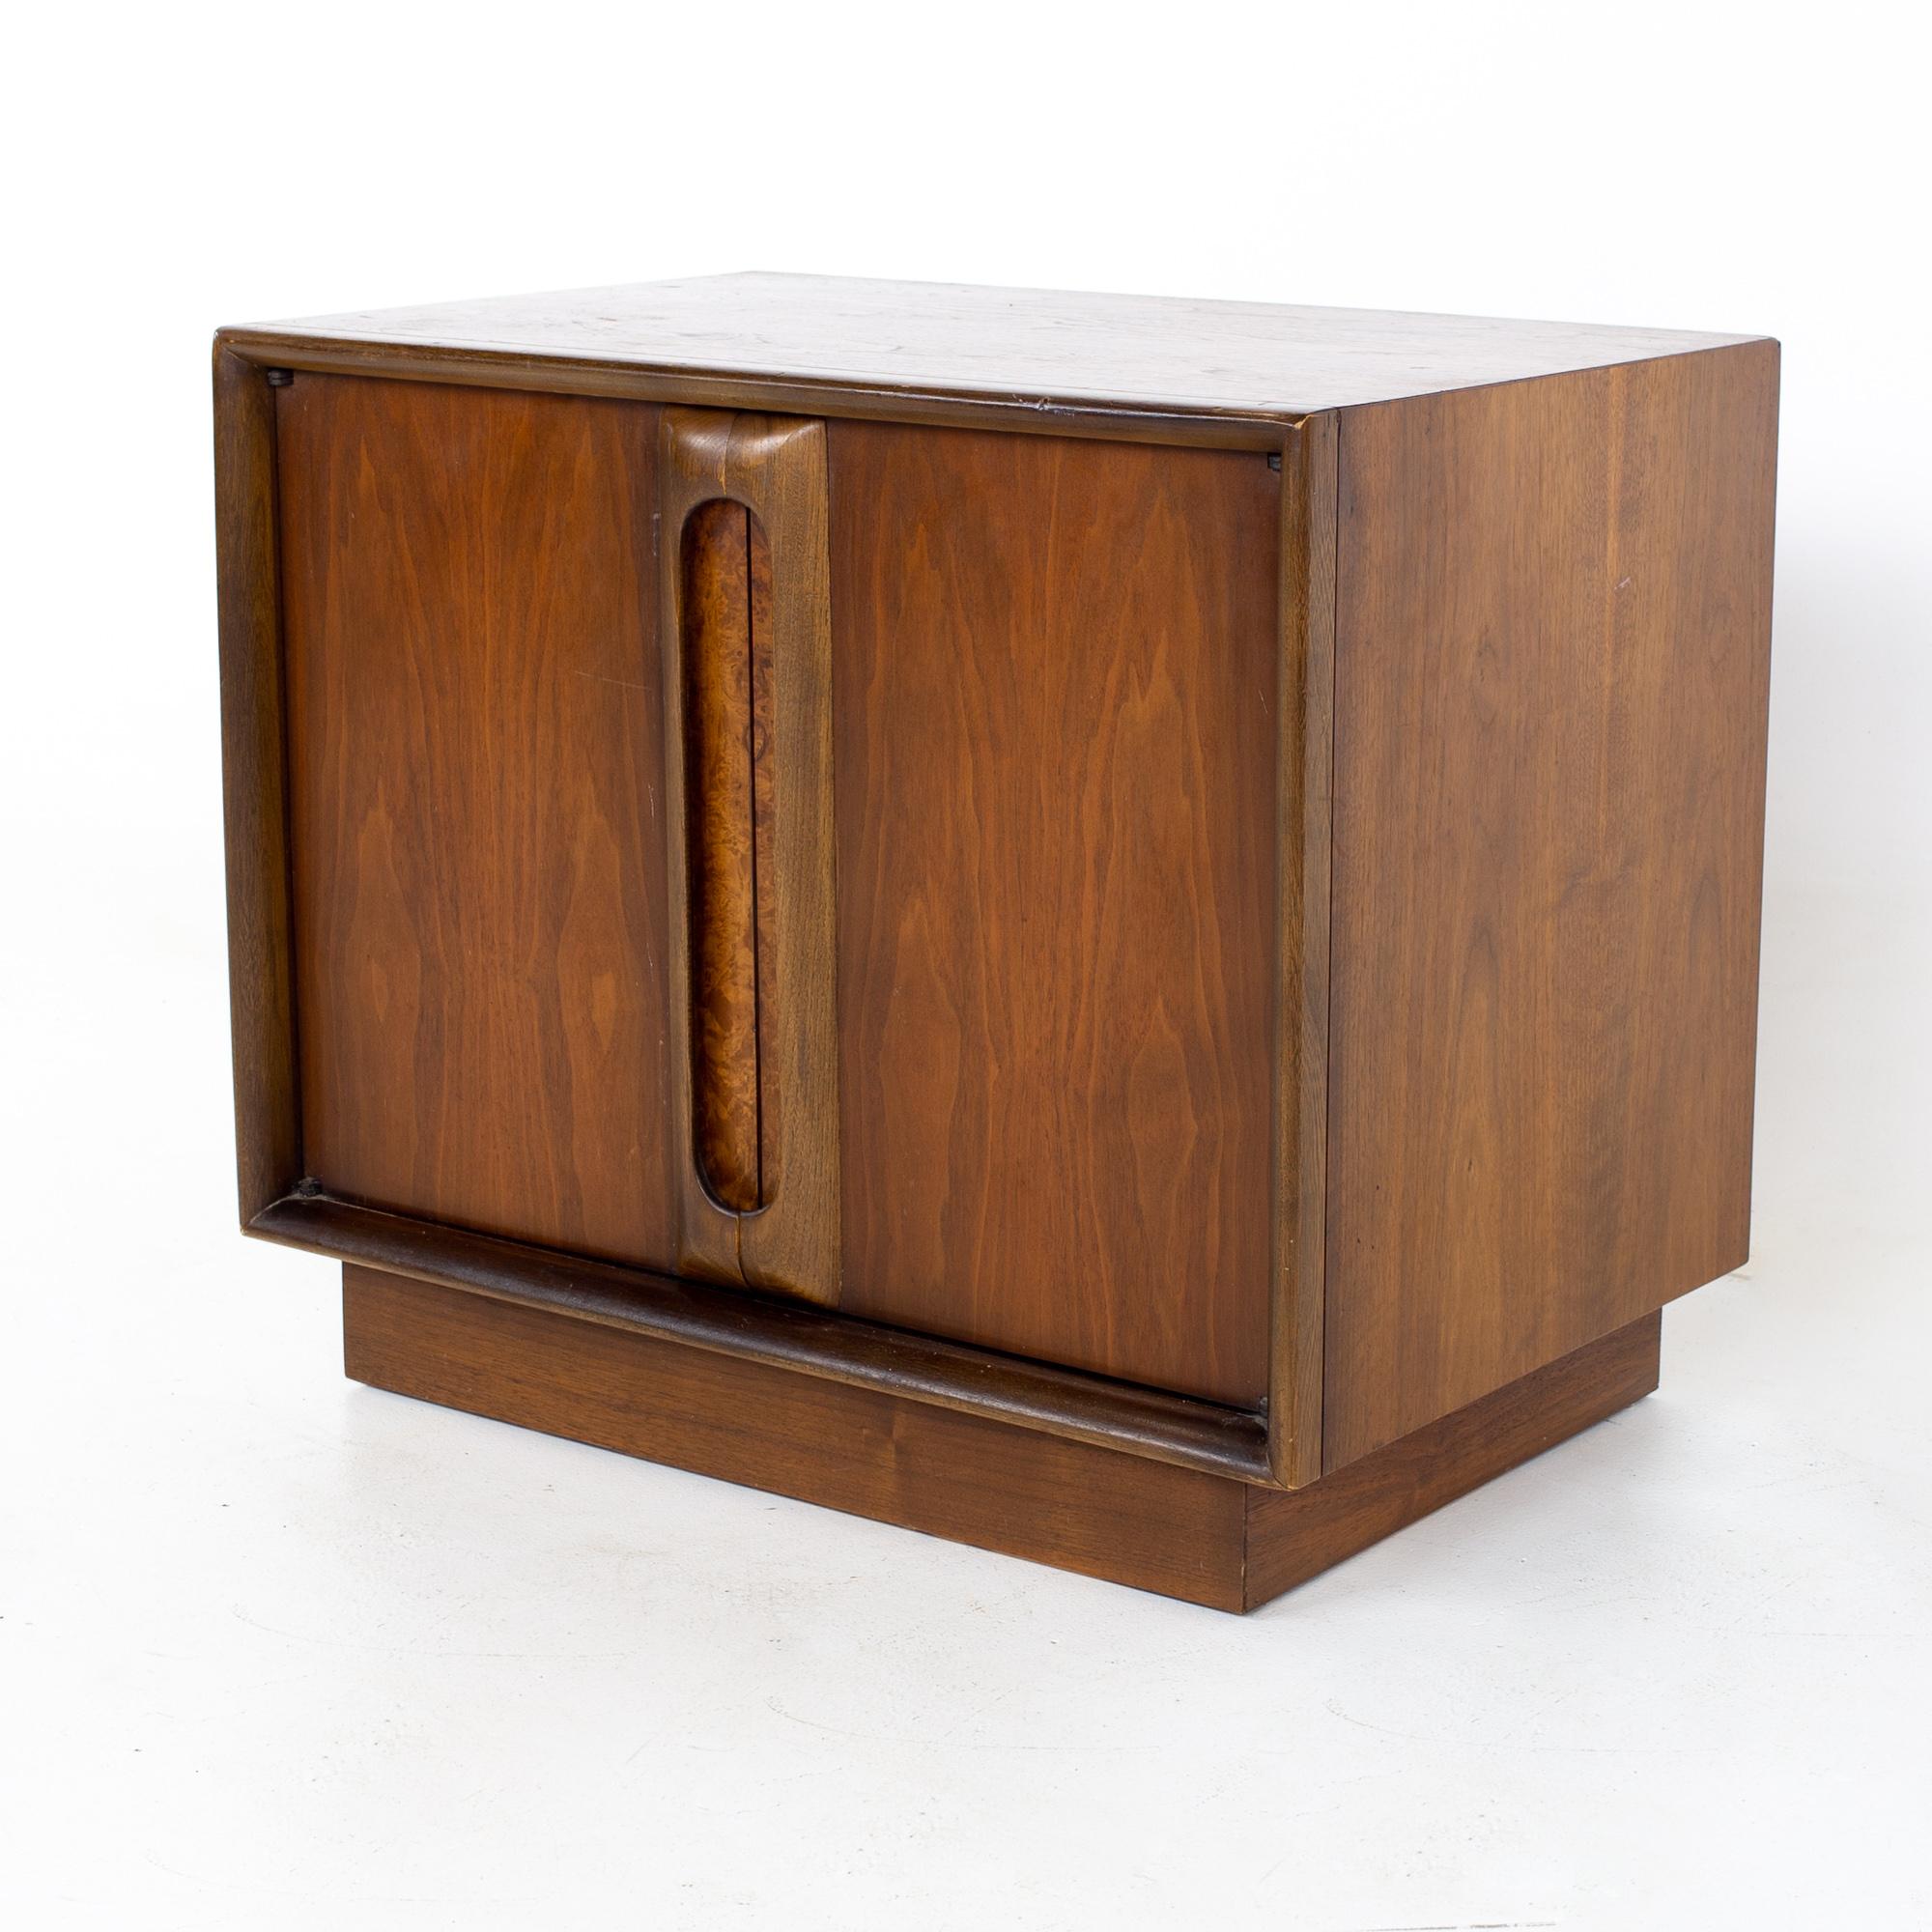 Lane mid century walnut and burlwood nightstand.
This nightstand measures: 26 wide x 17 deep x 22 inches high

All pieces of furniture can be had in what we call restored vintage condition. That means the piece is restored upon purchase so it’s